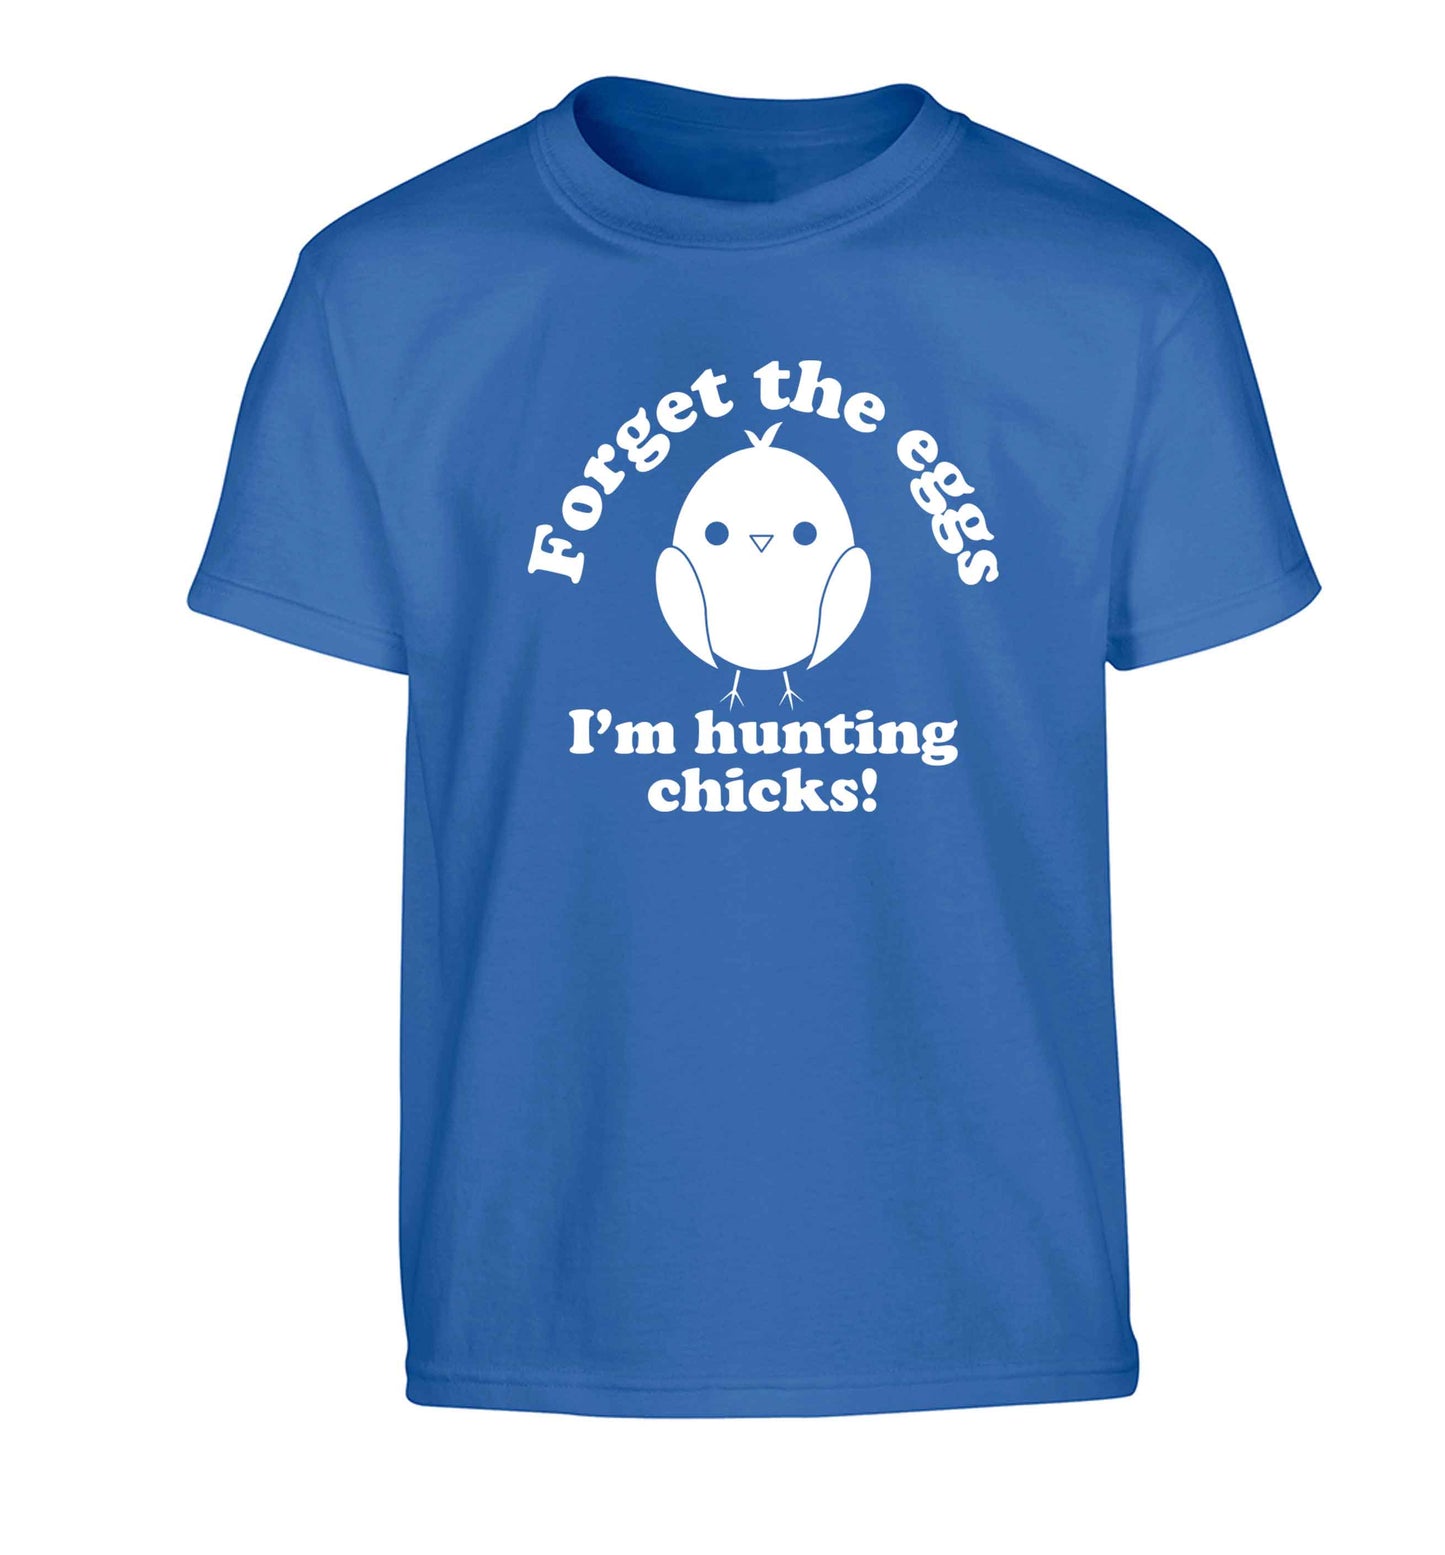 Forget the eggs I'm hunting chicks! Children's blue Tshirt 12-13 Years